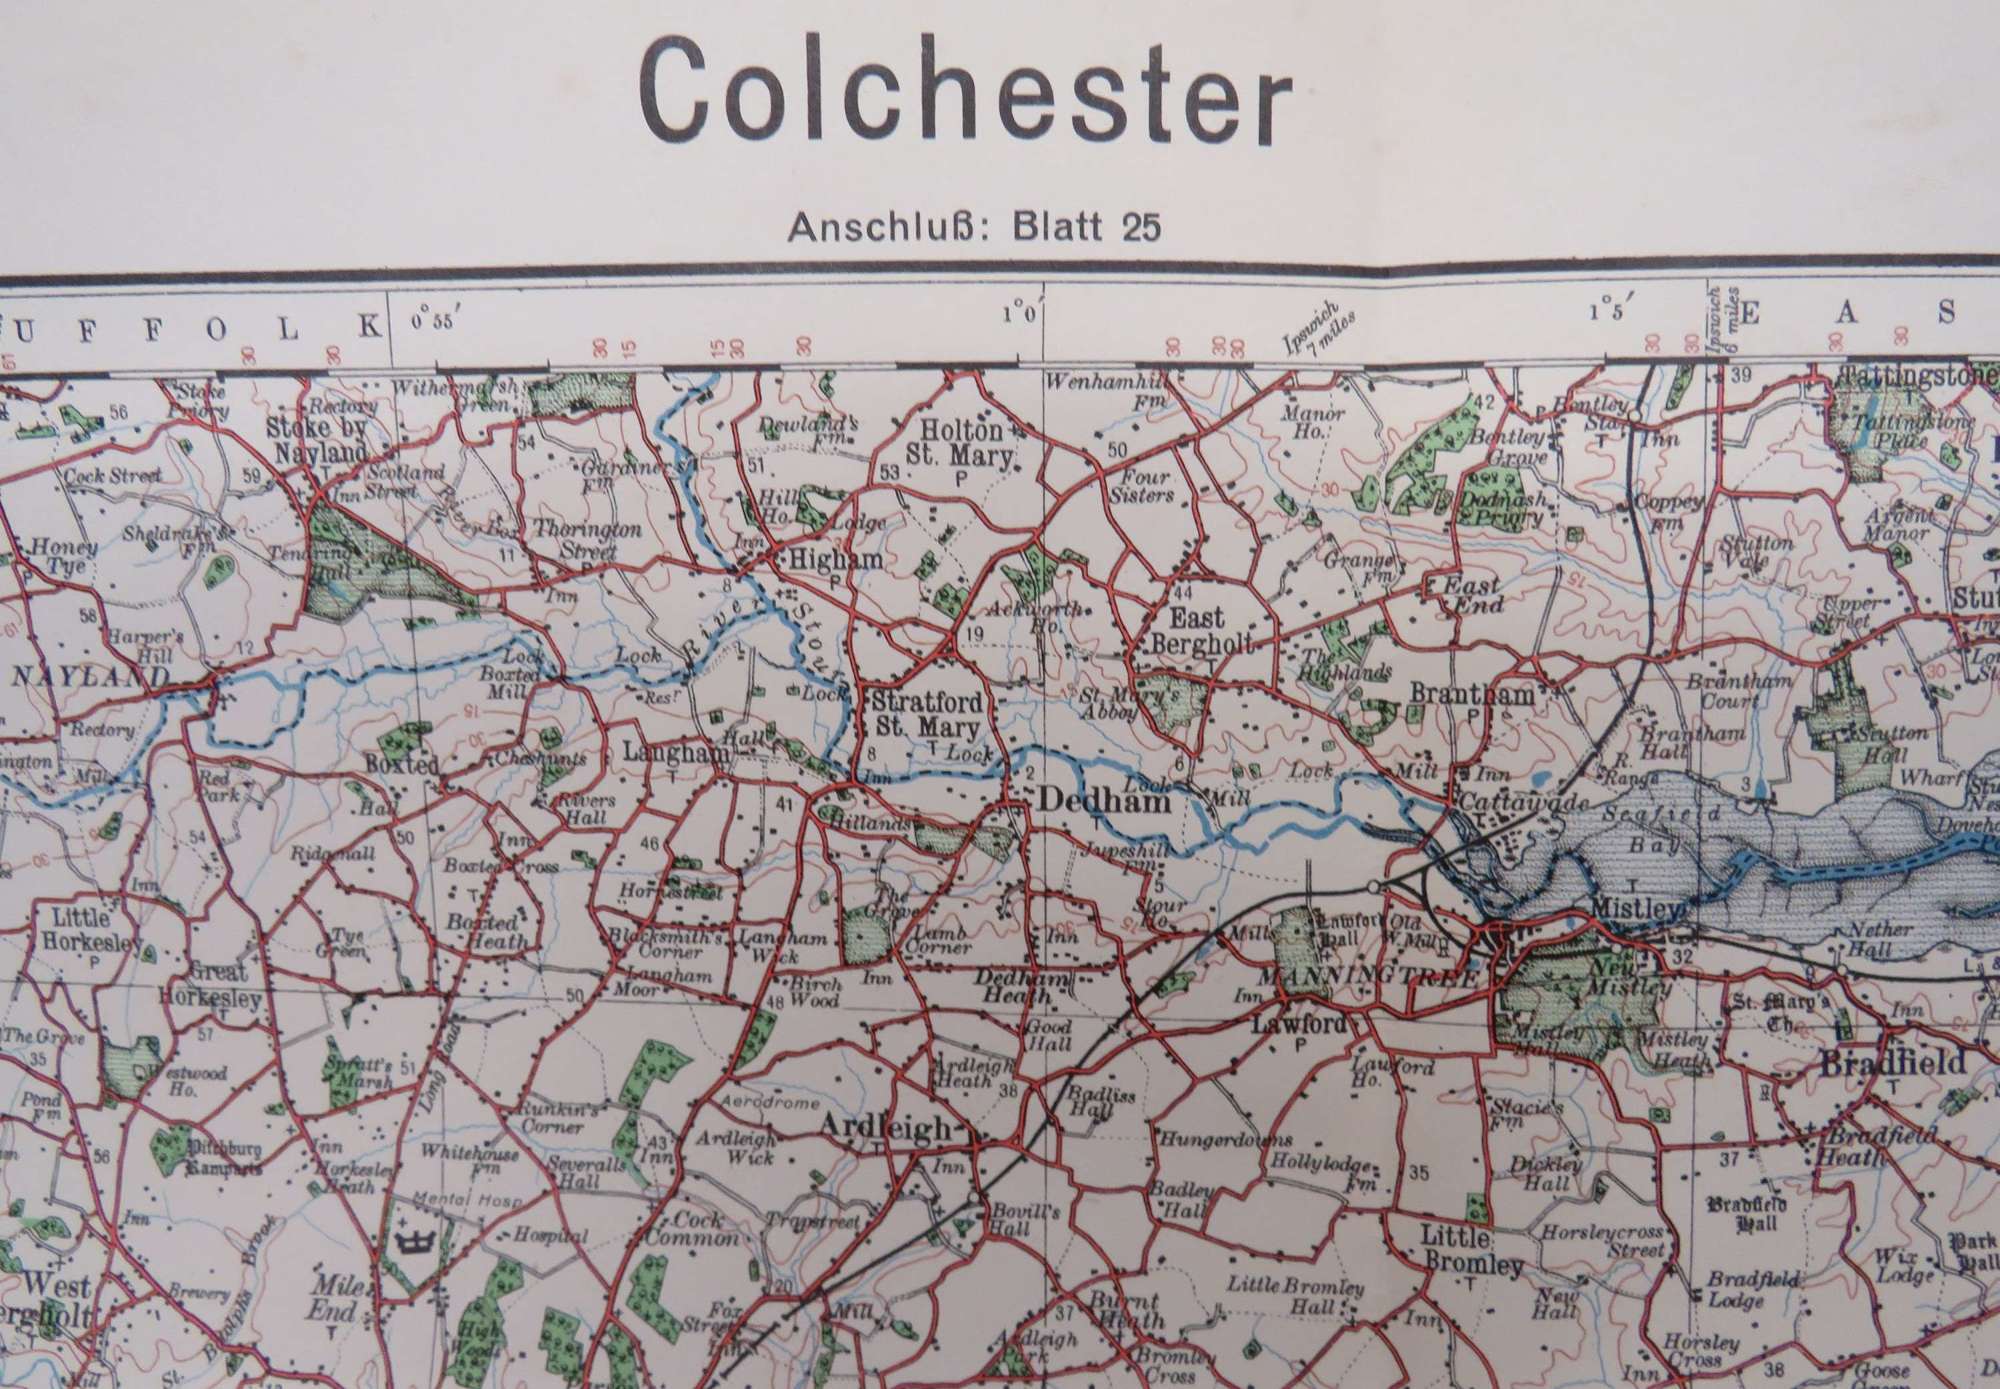 WW 2 German Invasion Map of Colchester